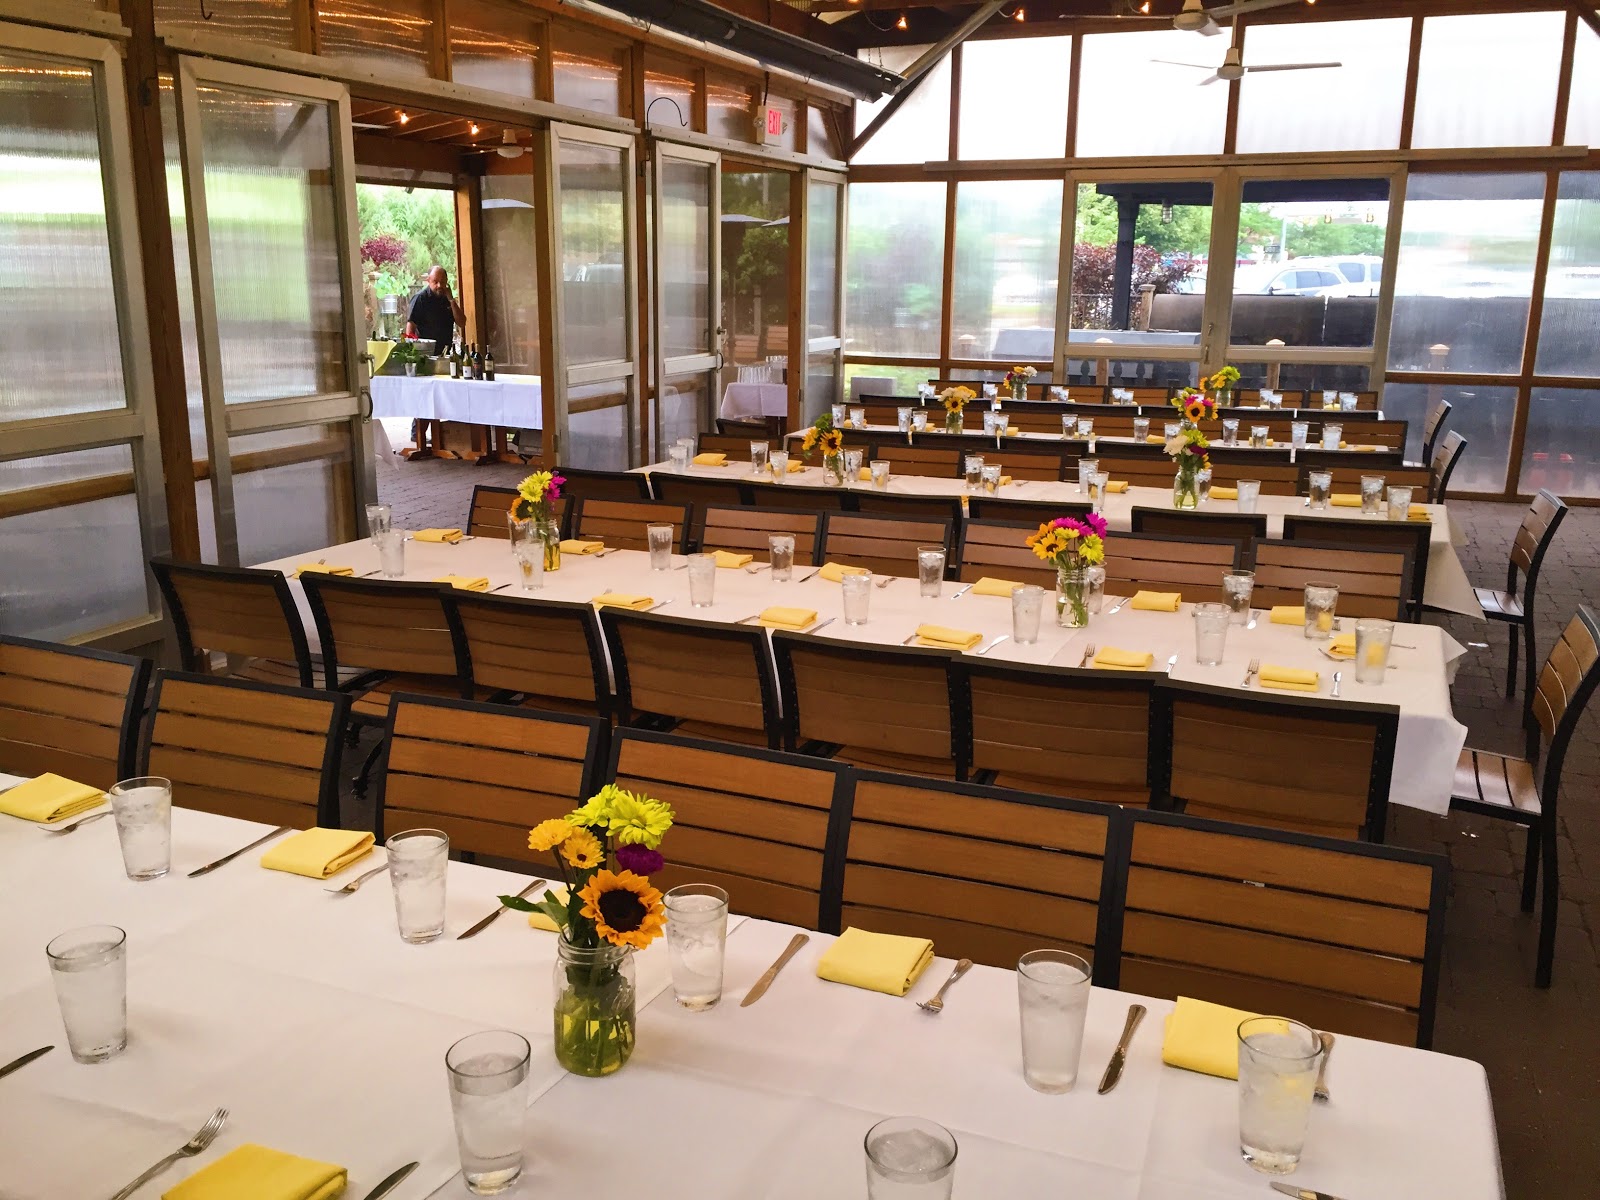 An enclosed patio space with ;png tables, set formally with tablecloths, colored napkins, and flowers.
